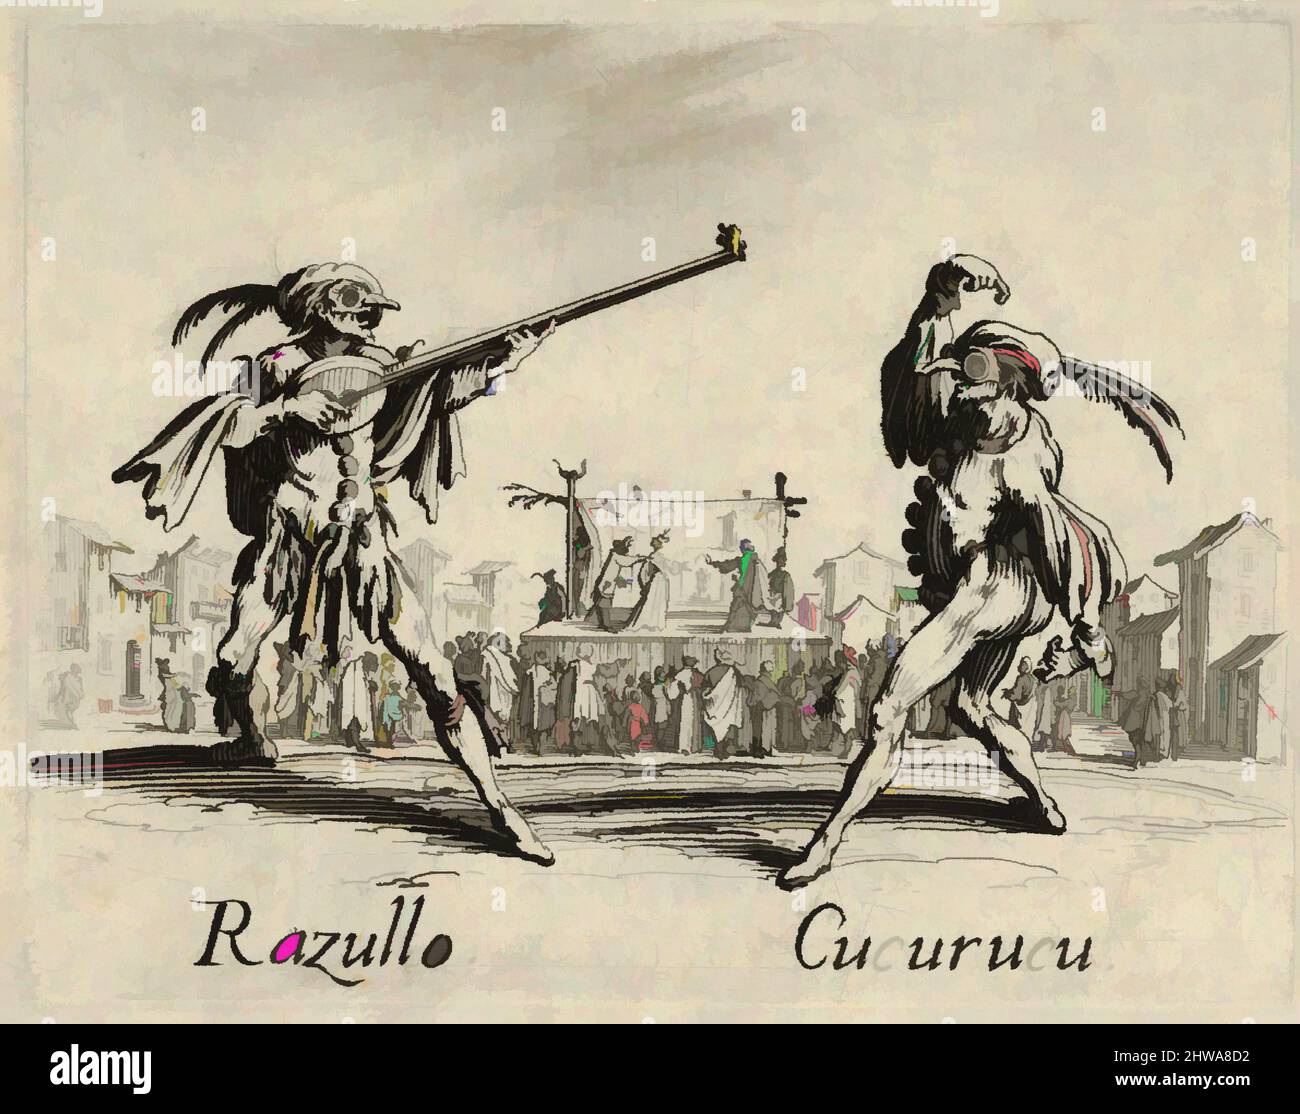 Art inspired by Drawings and Prints, Print, Razullo - Cucurucu, from the Balli di Sfessania, Artist, Jacques Callot, French, Nancy 1592–1635, Classic works modernized by Artotop with a splash of modernity. Shapes, color and value, eye-catching visual impact on art. Emotions through freedom of artworks in a contemporary way. A timeless message pursuing a wildly creative new direction. Artists turning to the digital medium and creating the Artotop NFT Stock Photo